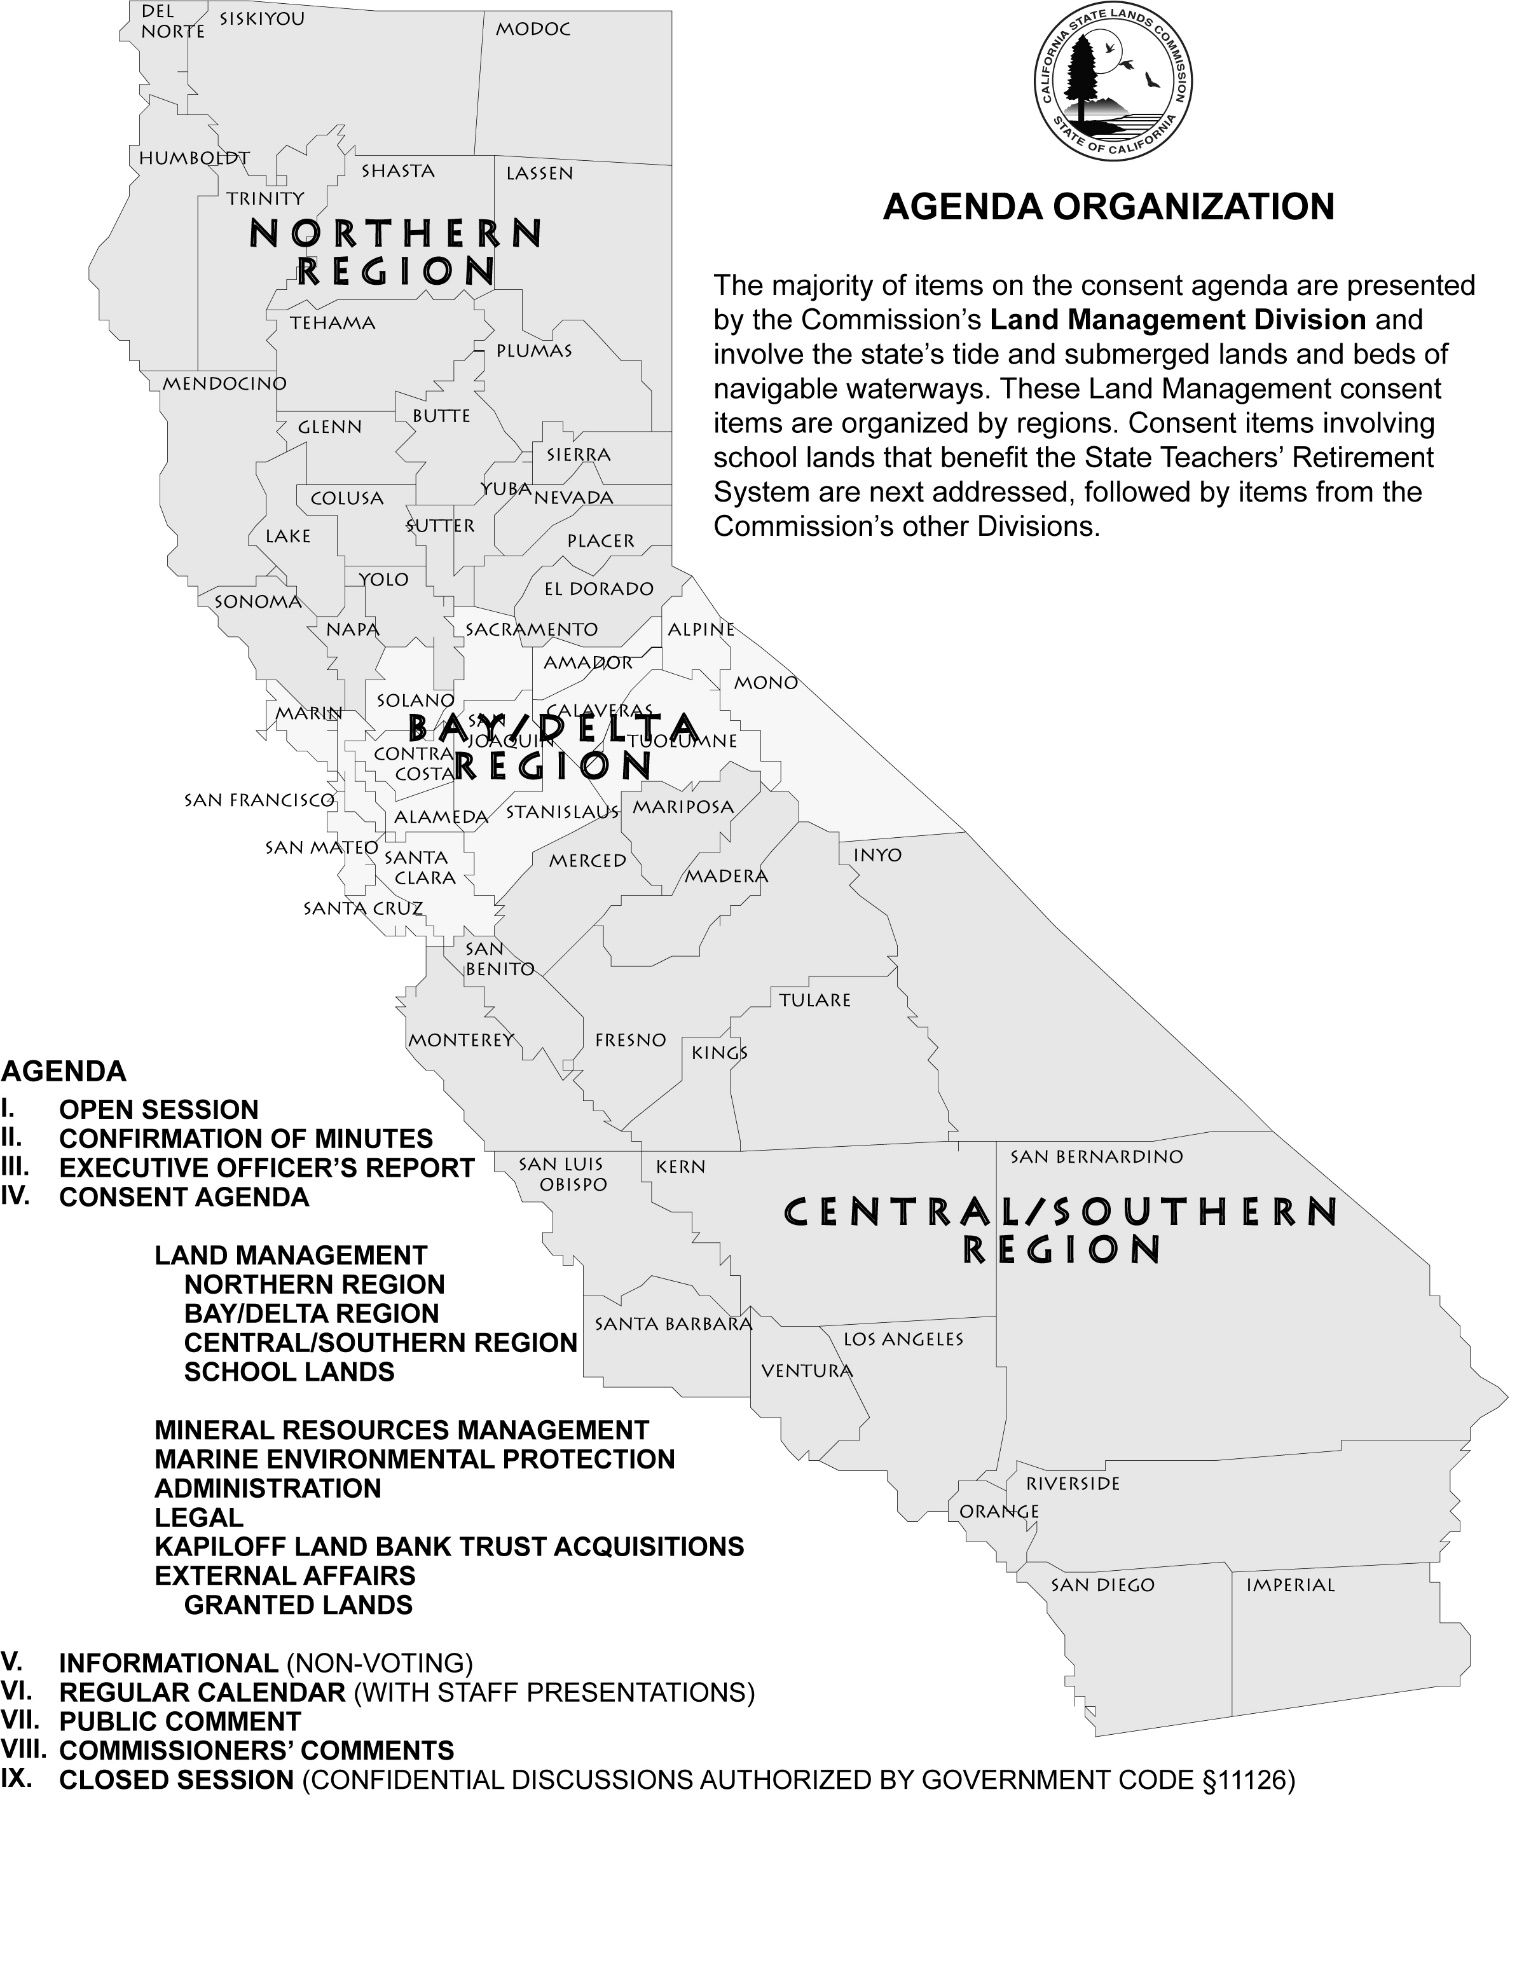 Regional map of the State of California with an outline of the meeting agenda printed beside it.